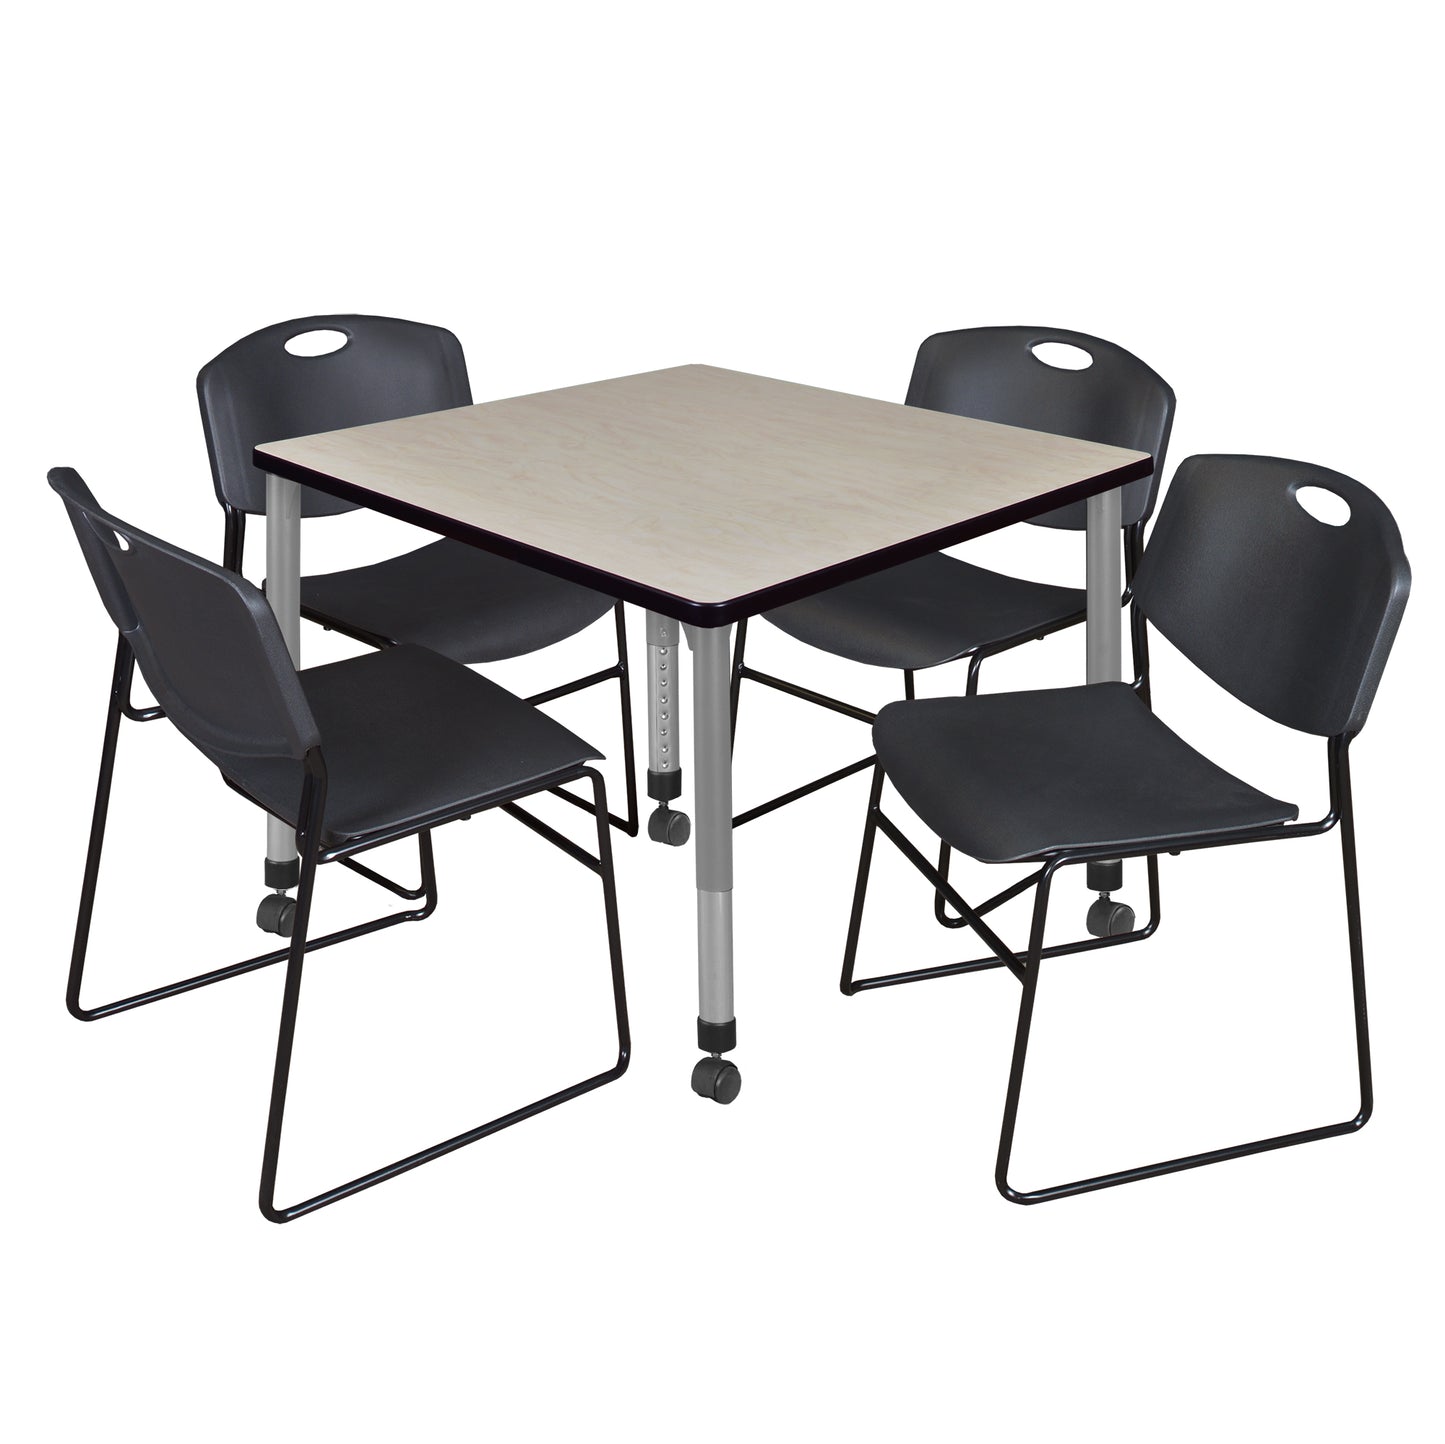 Regency Kee 36 in. Square Adjustable Classroom Table & 4 Zeng Stack Chairs